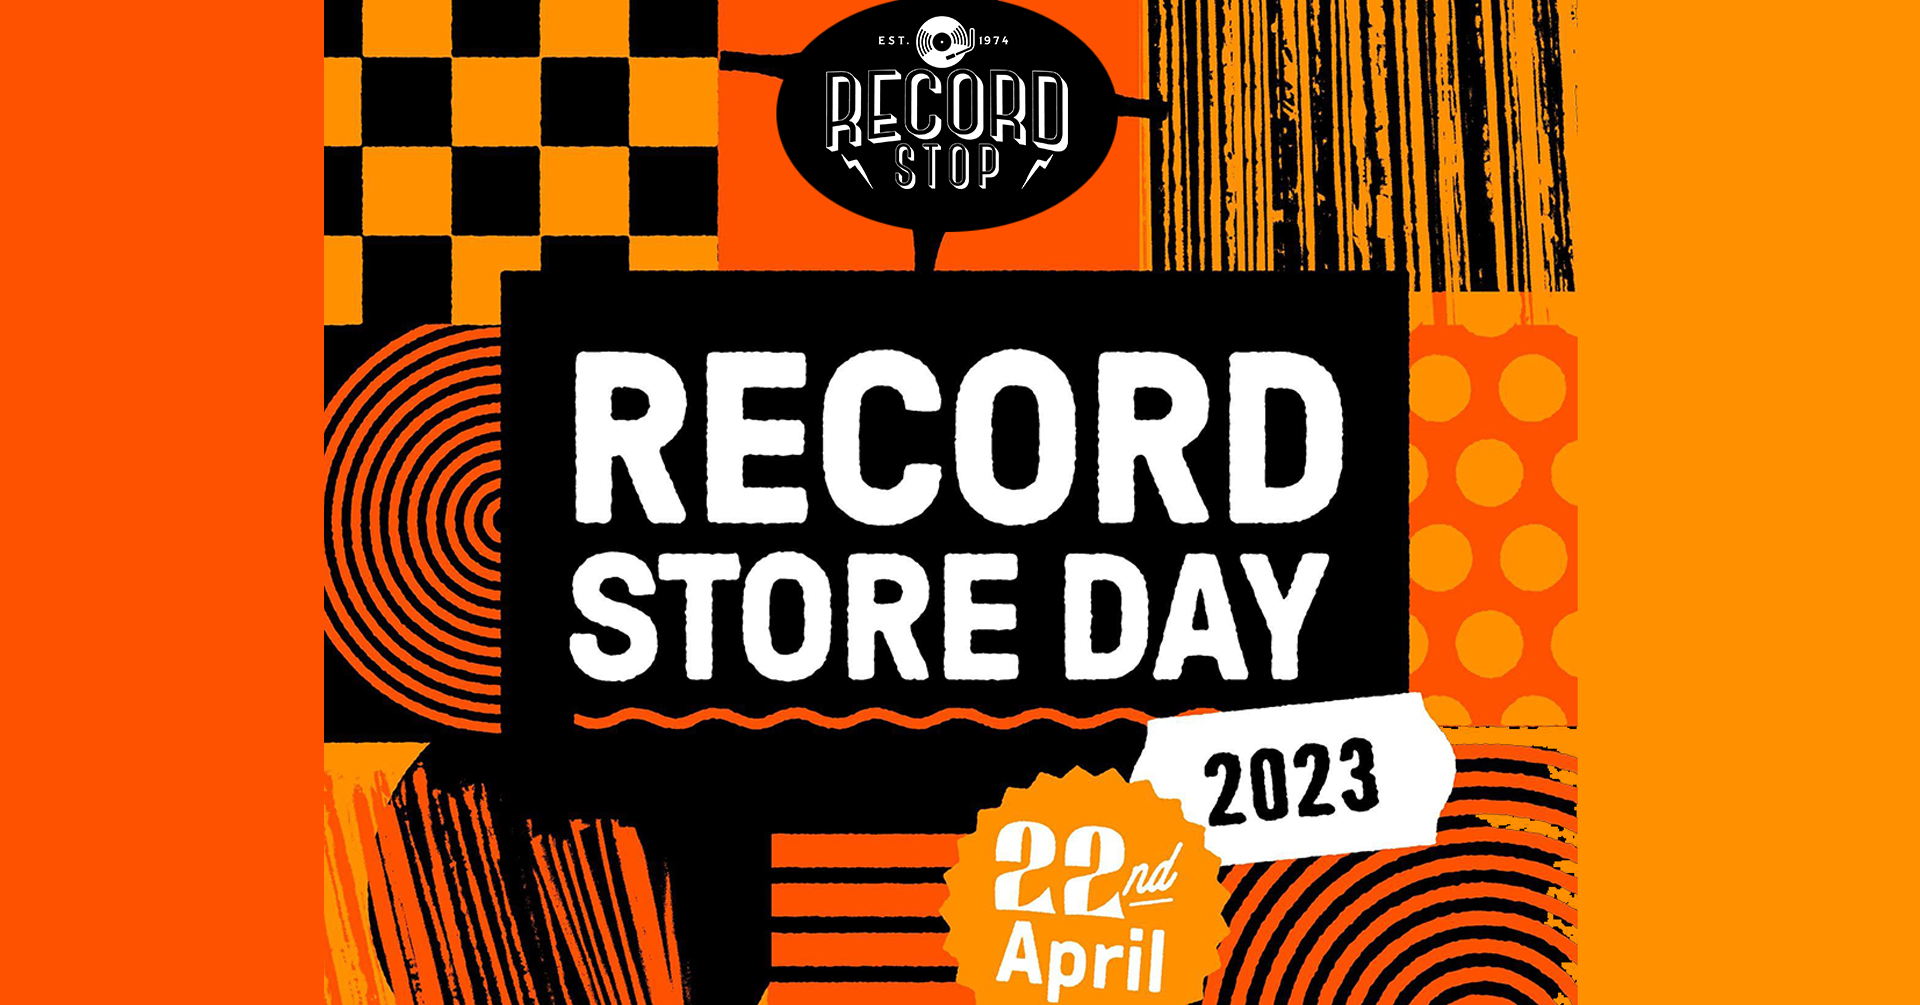 View the Record Store Day 2023 List of Titles